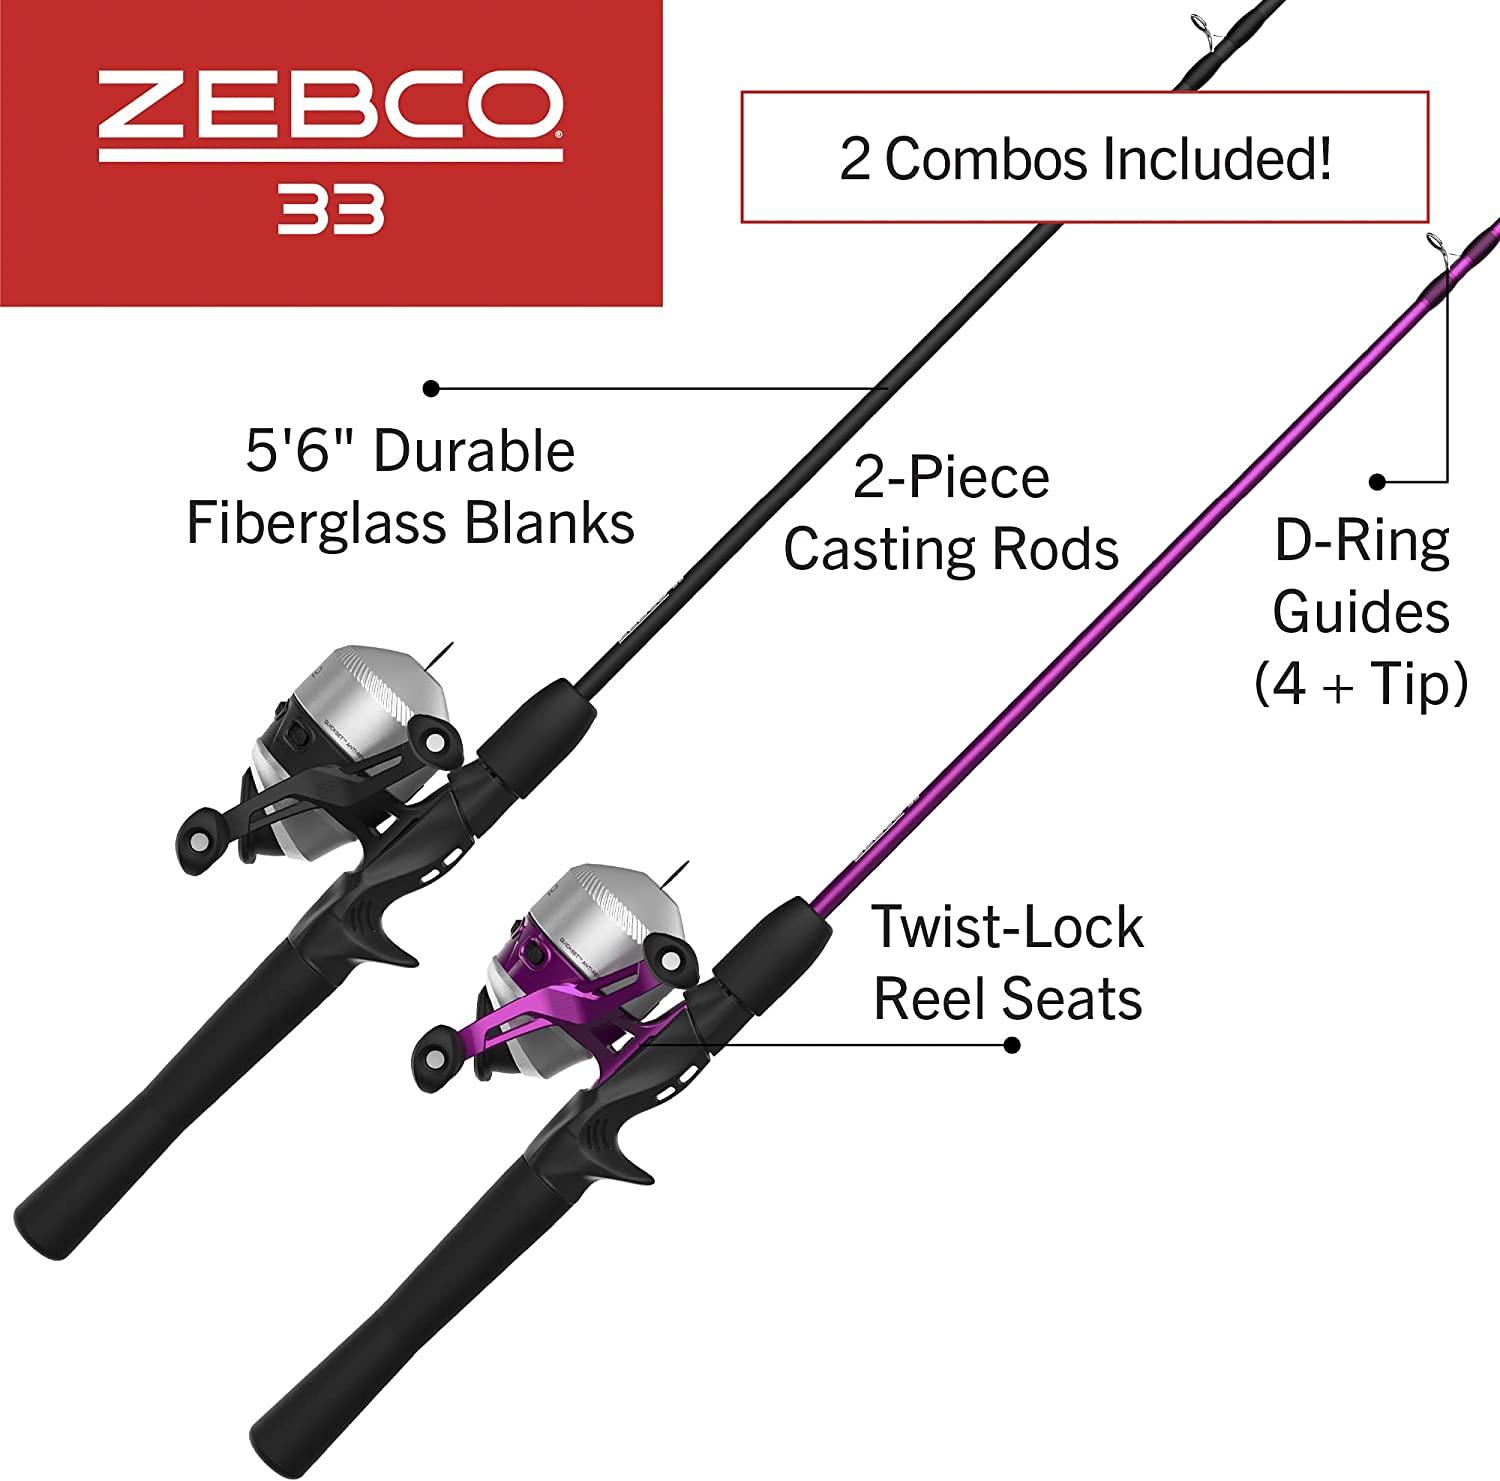 Zebco 33 Spincast Reel and 2-Piece Fishing Rod Combo 5-Foot 6